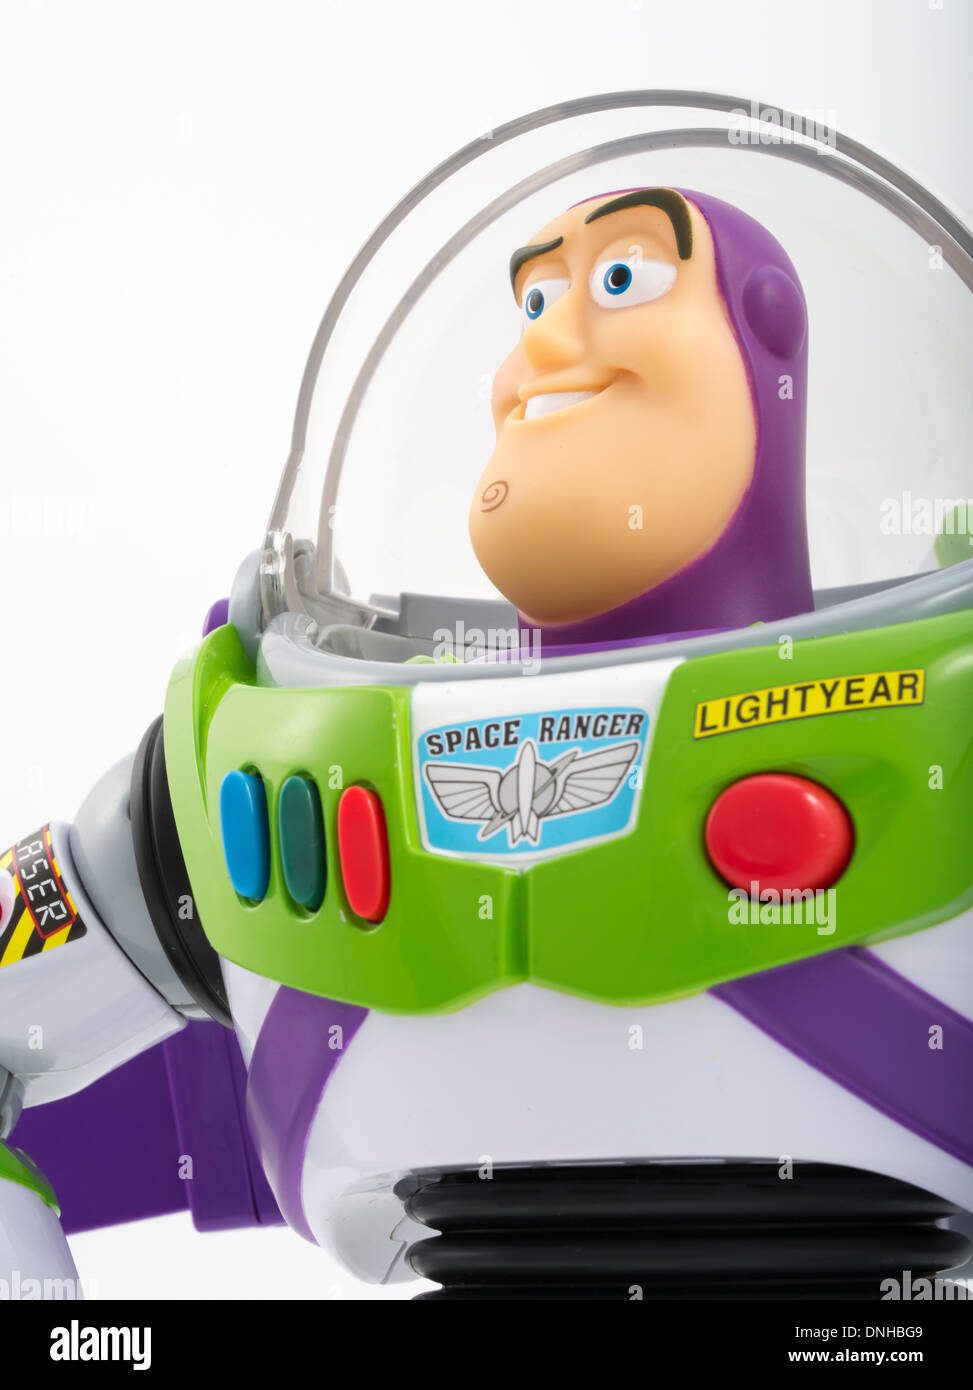 Buzz Lightyear iconic children's toy from movie Toy Story produced by Thinkway Toys Stock Photo